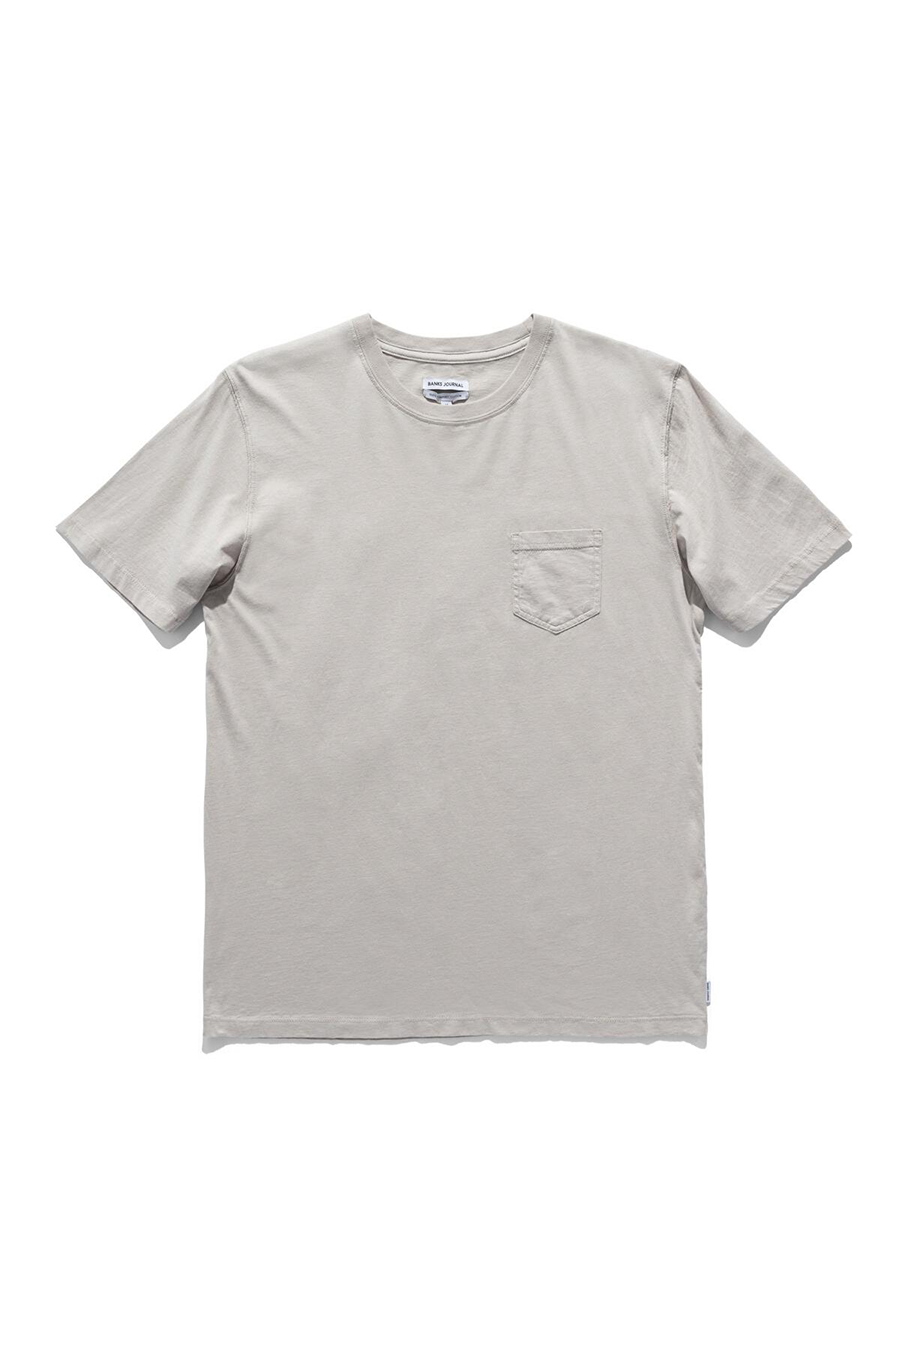 Primary Classic Tee | Washed Grey